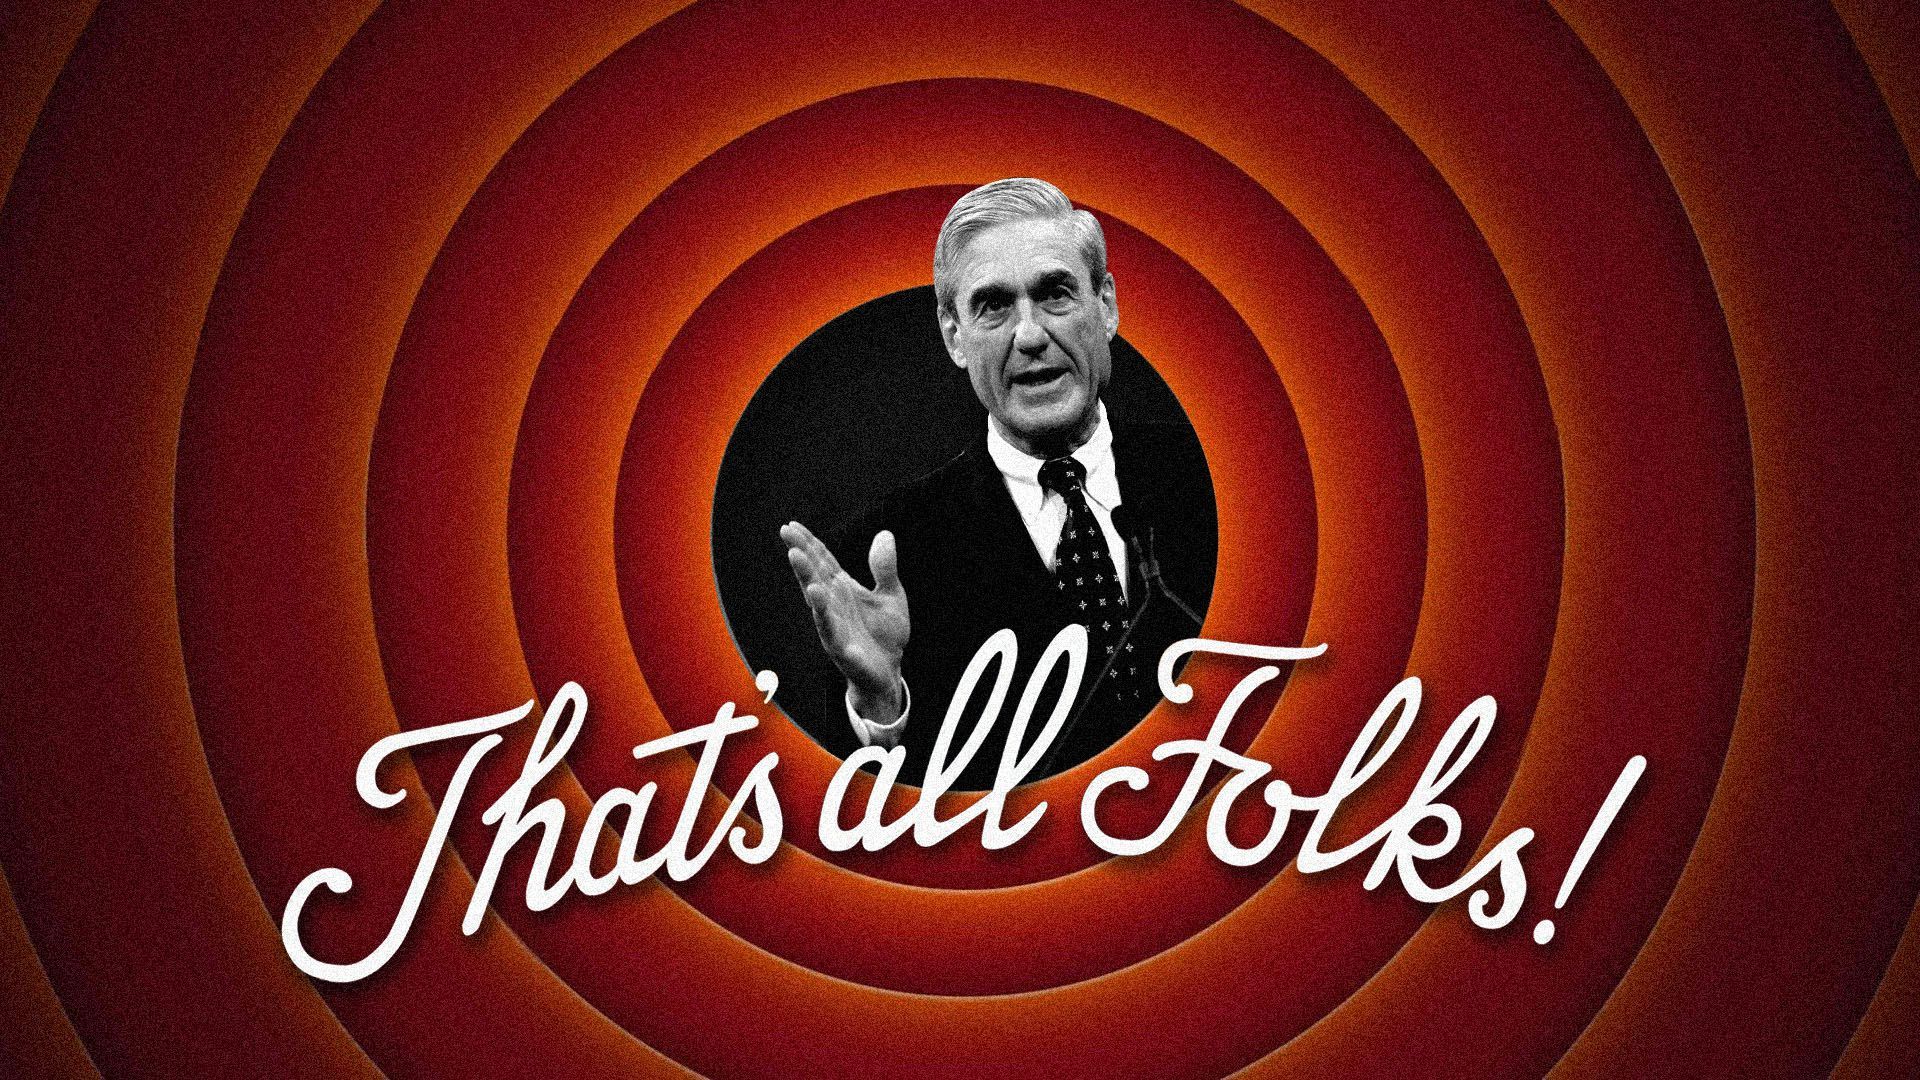 Axios illustration of Robert Mueller inside a Looney Toons spiral with "That's all Folks!" written in script